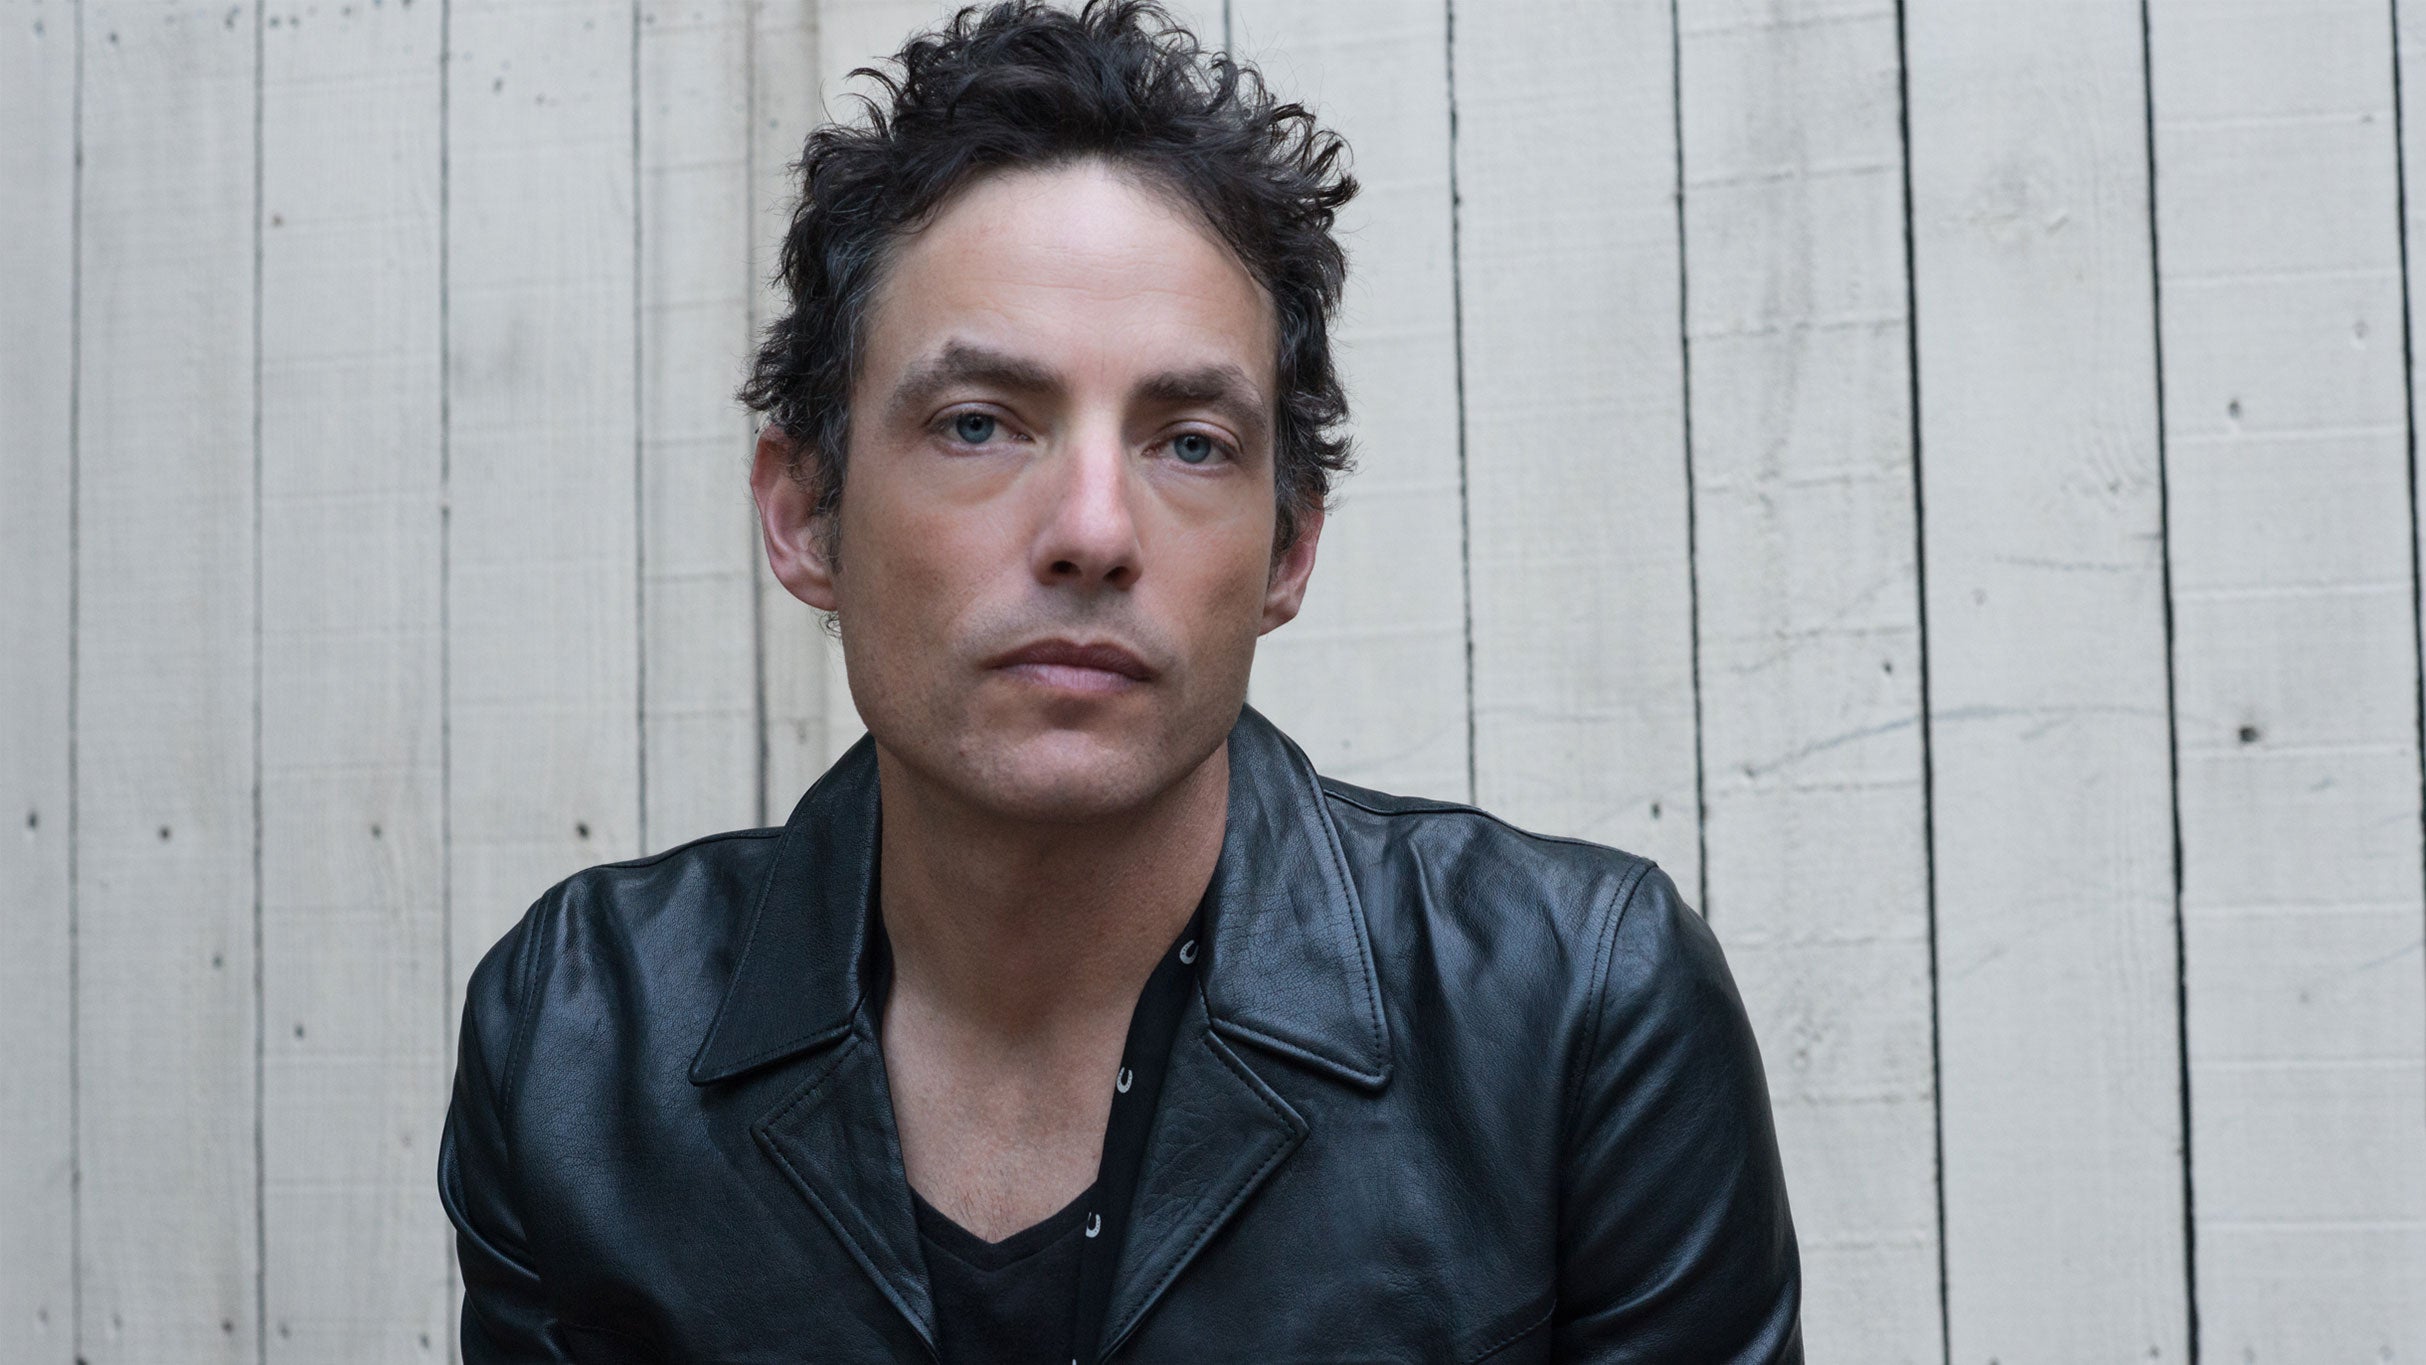 The Wallflowers Perform Bringing Down The Horse & Long After Dark presale code for approved tickets in Los Angeles